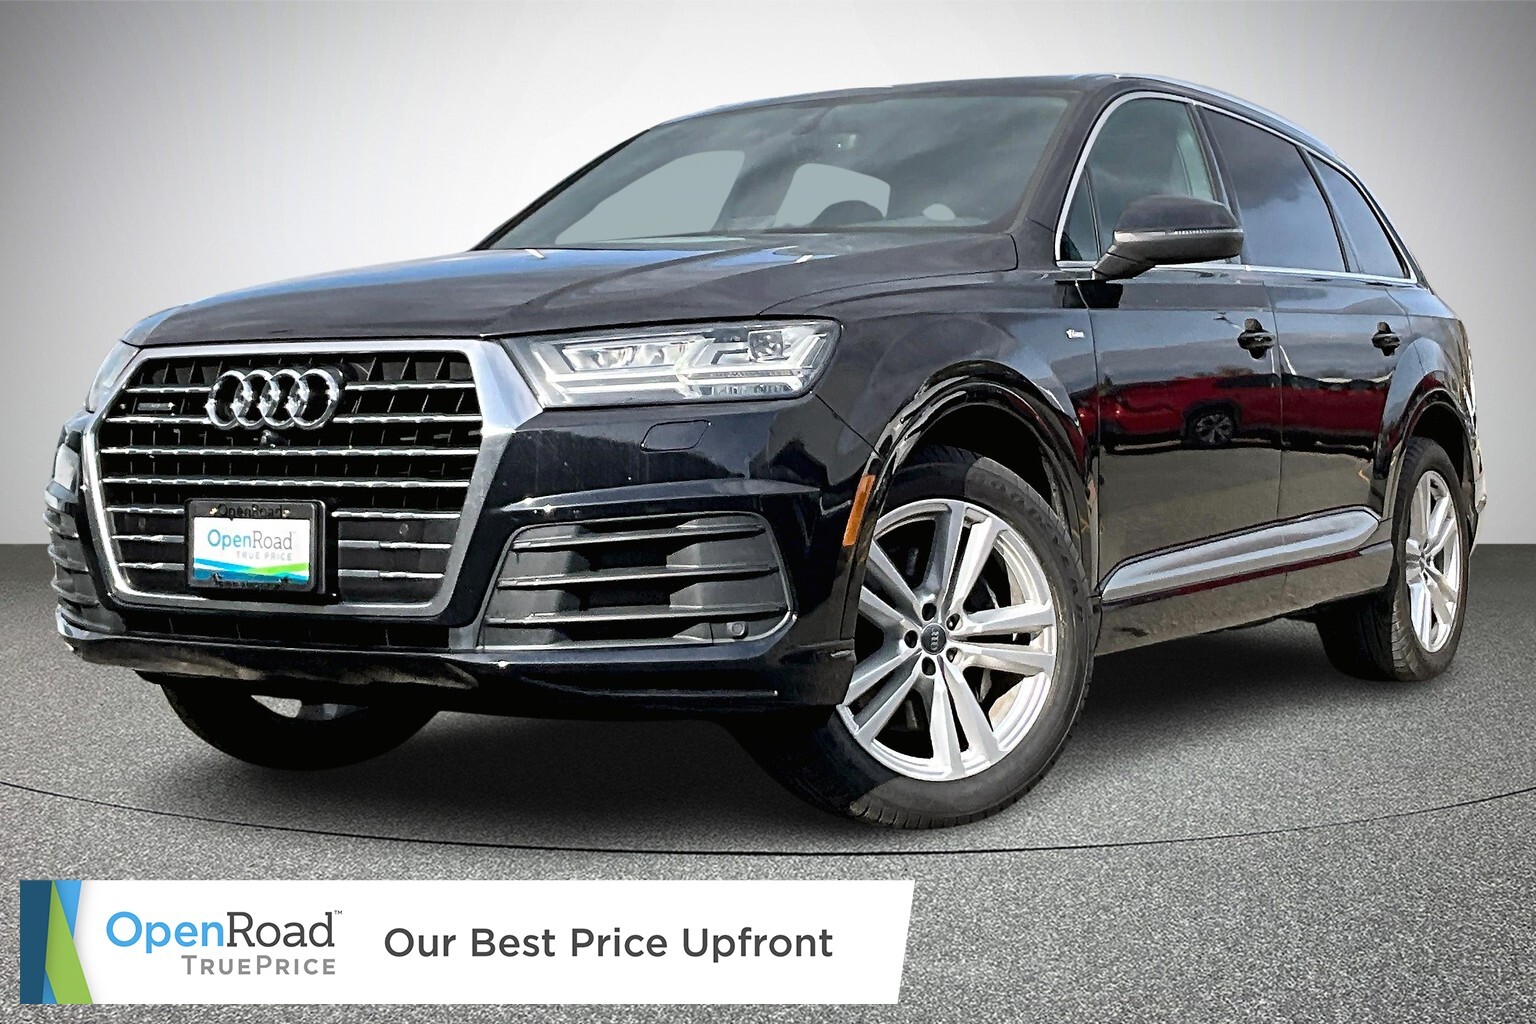 2017 Audi Q7 For as little as $331.91 bi-weekly!